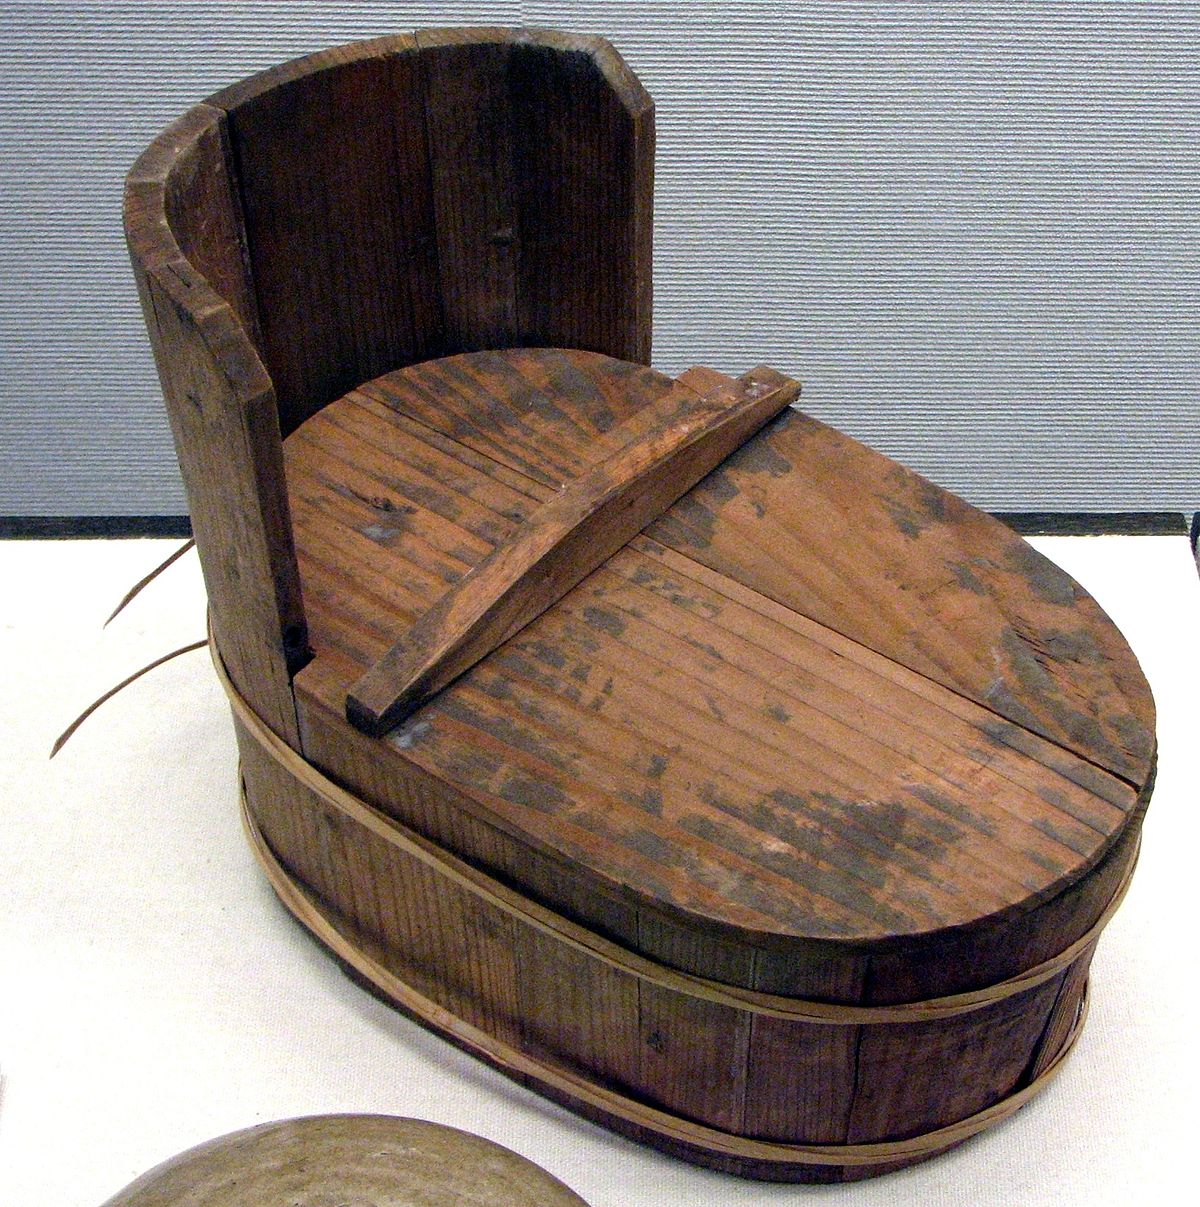 Cradle (bed) - Wikipedia